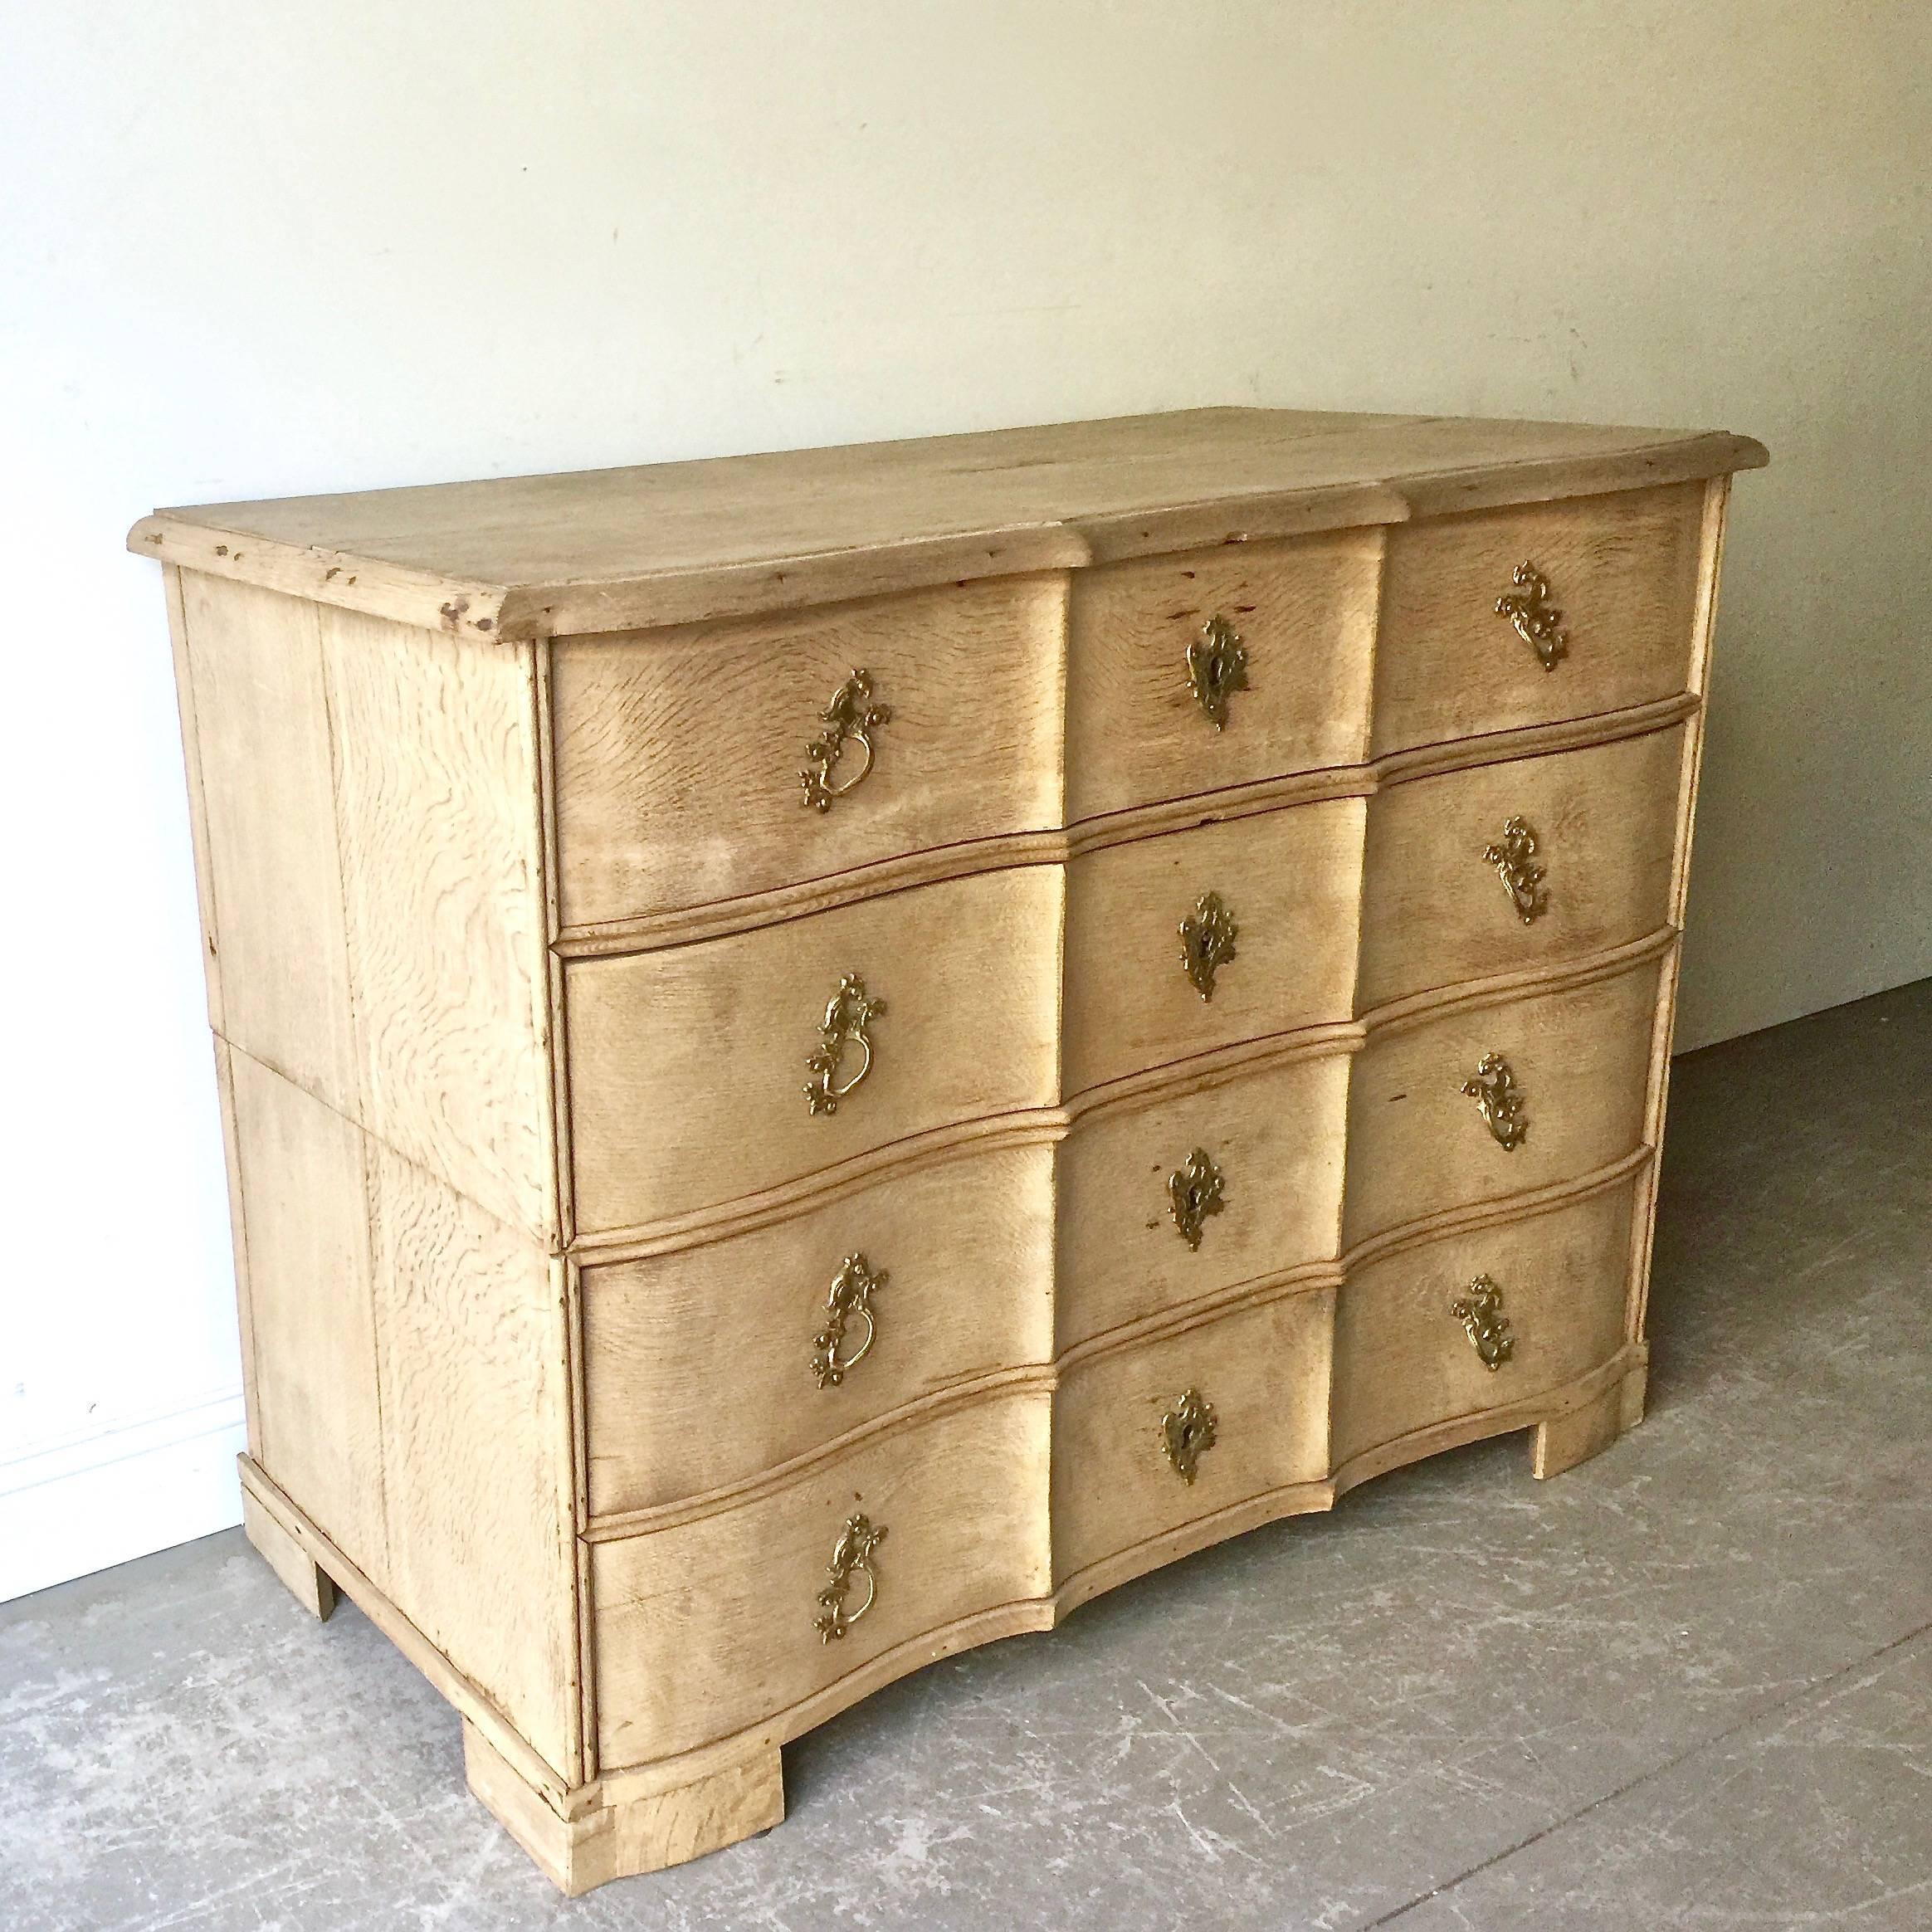 18th century Danish chest in two parts with four deep drawers from late Rococo period in richly carved bleached oak with curvaceous serpentine drawer fronts, shaped top and bracket feet. 
Here are few examples surprising pieces and objects,